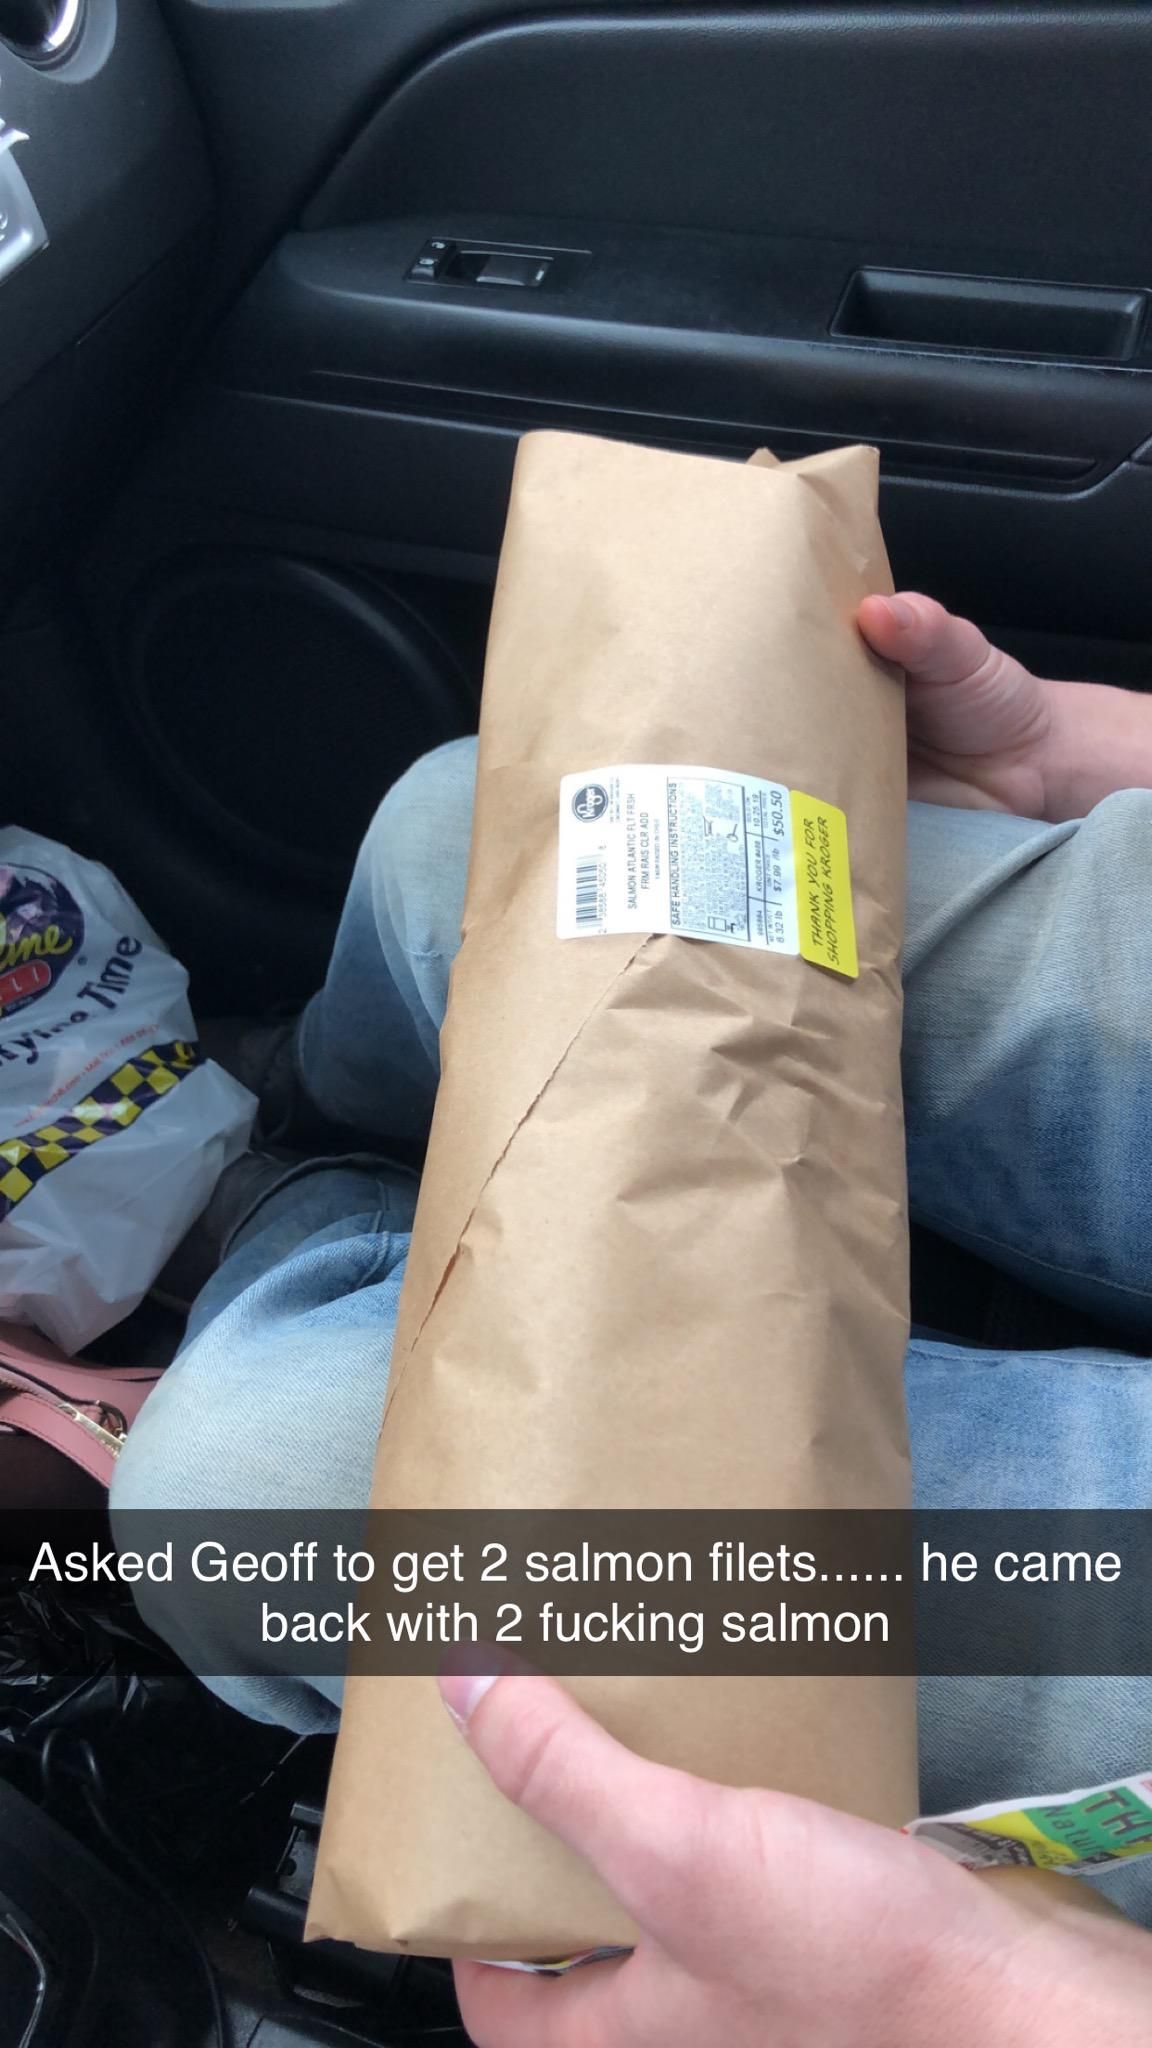 Throwback to the time where my gf asked me to run in and get salmon. I'm not allowed to get it any more